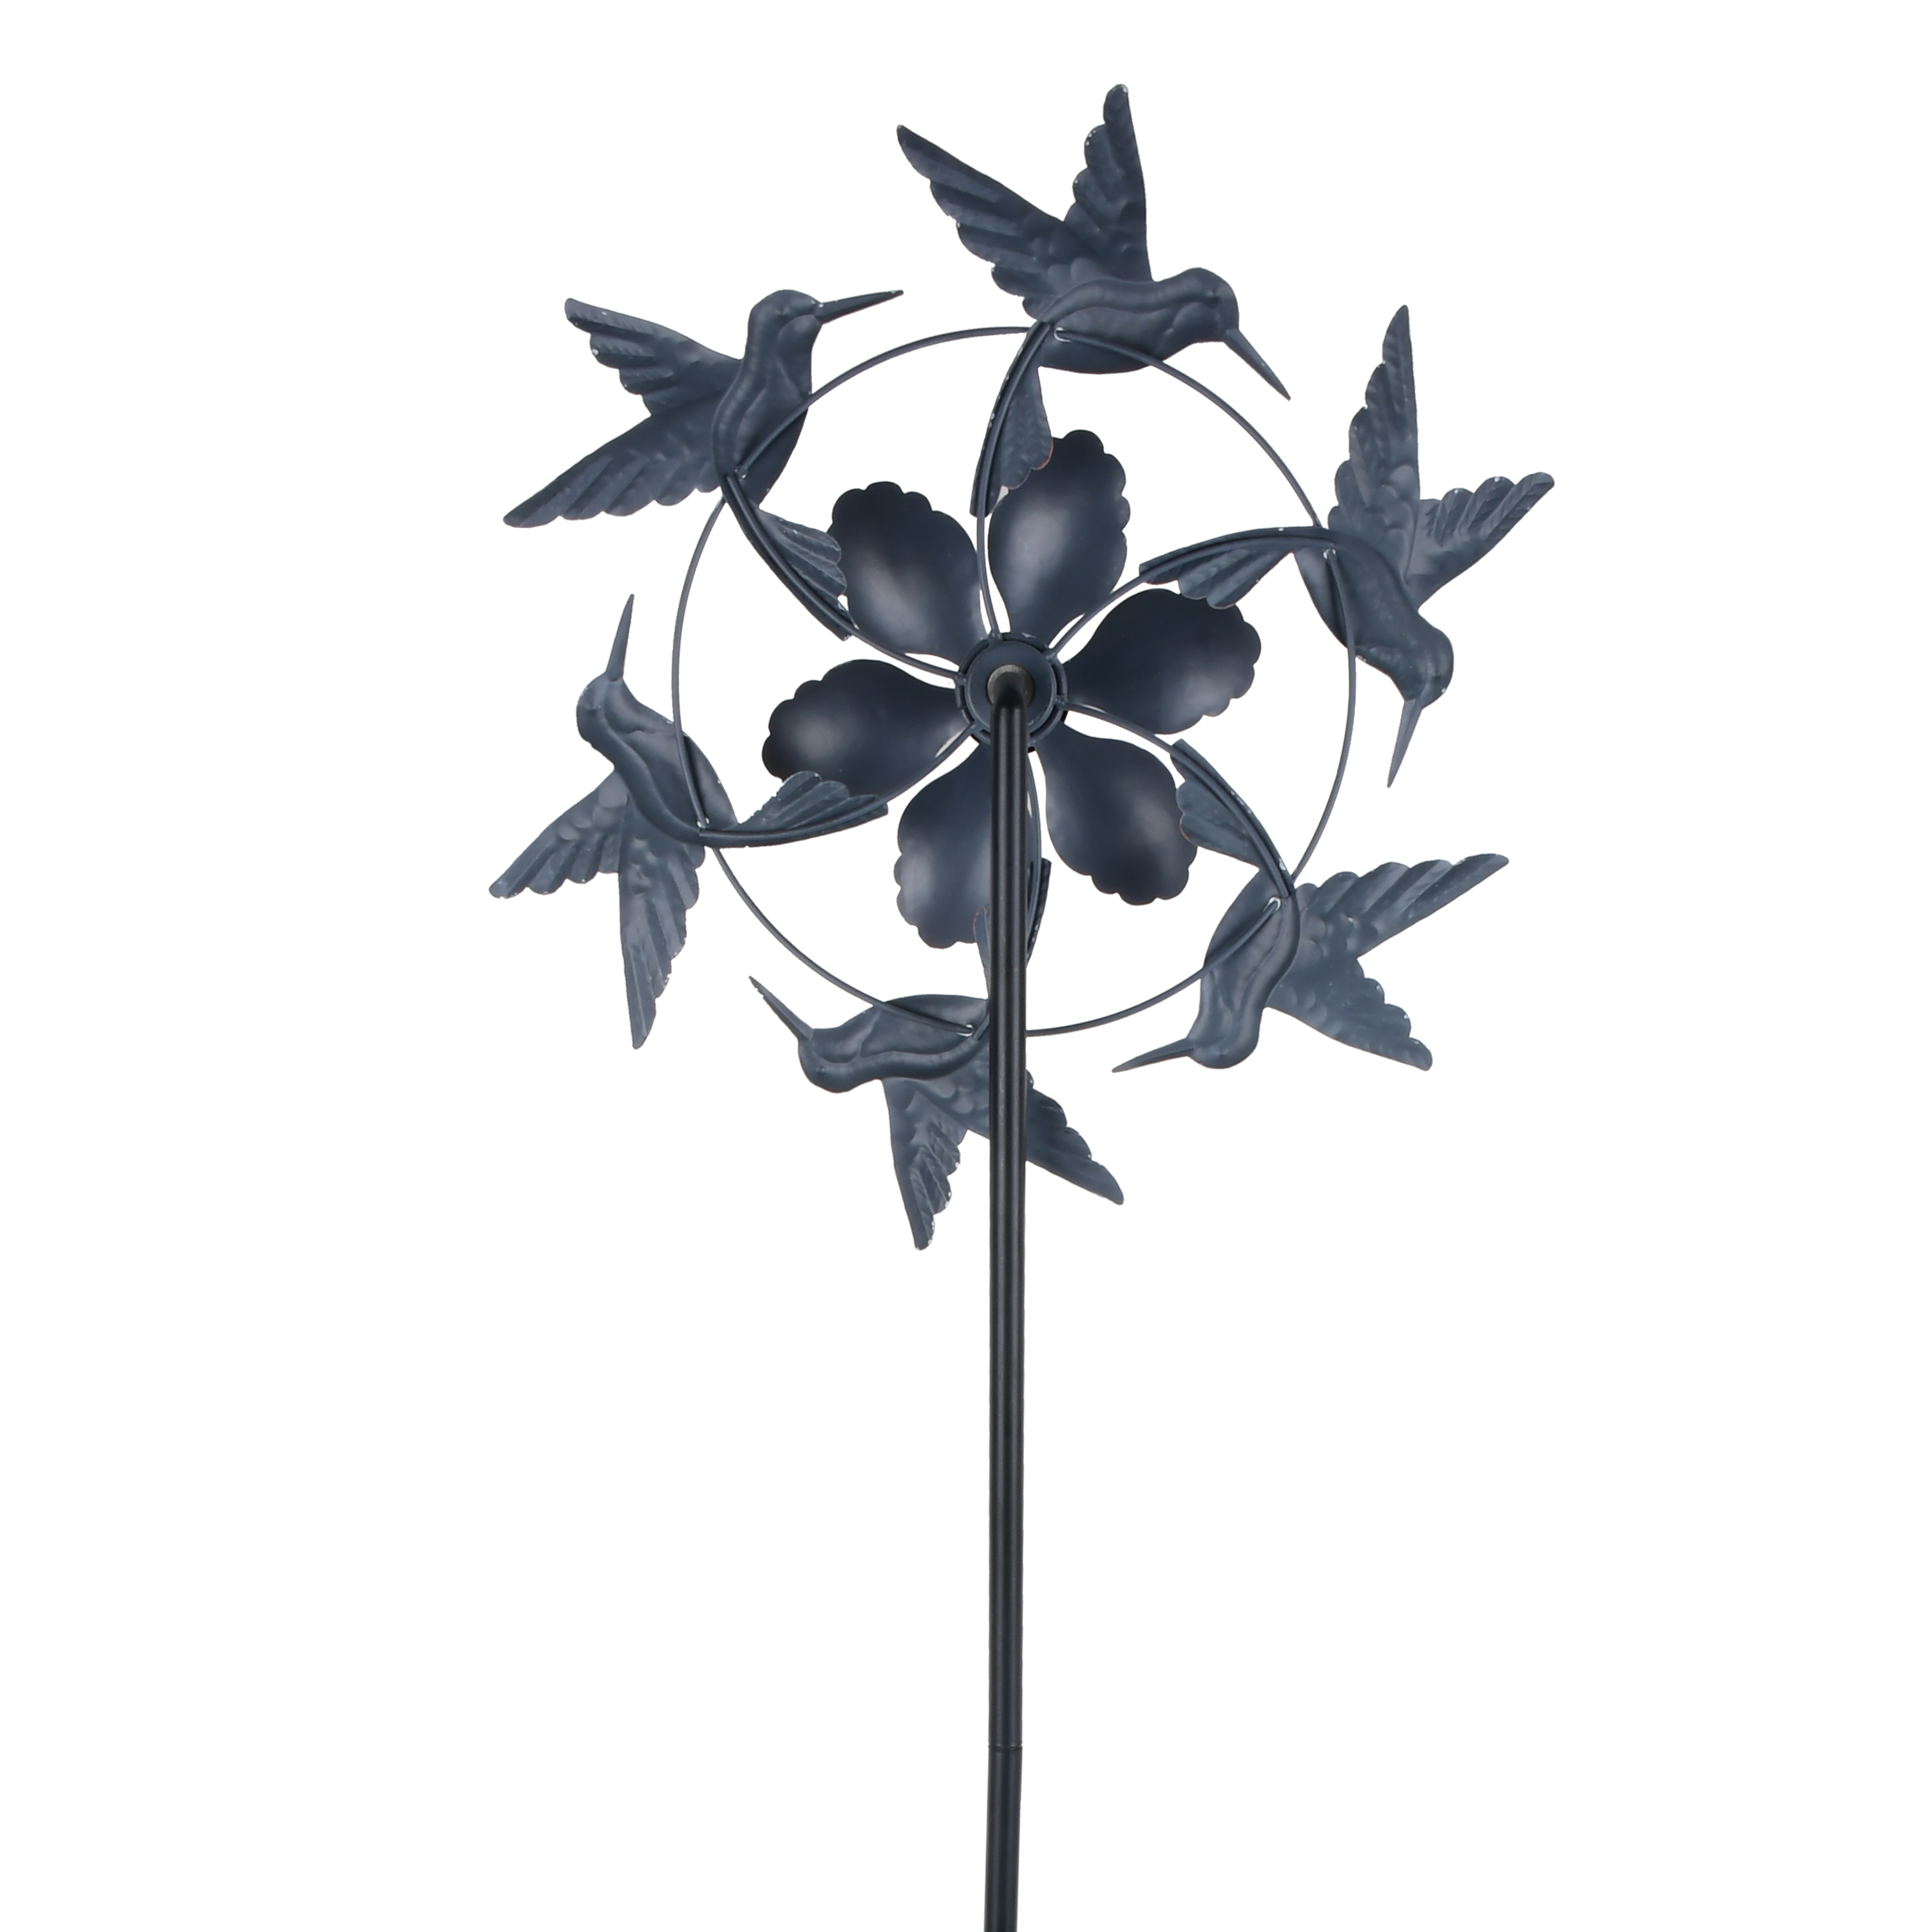 Mainstays 53" Copper Metal Wind Spinner - image 5 of 9